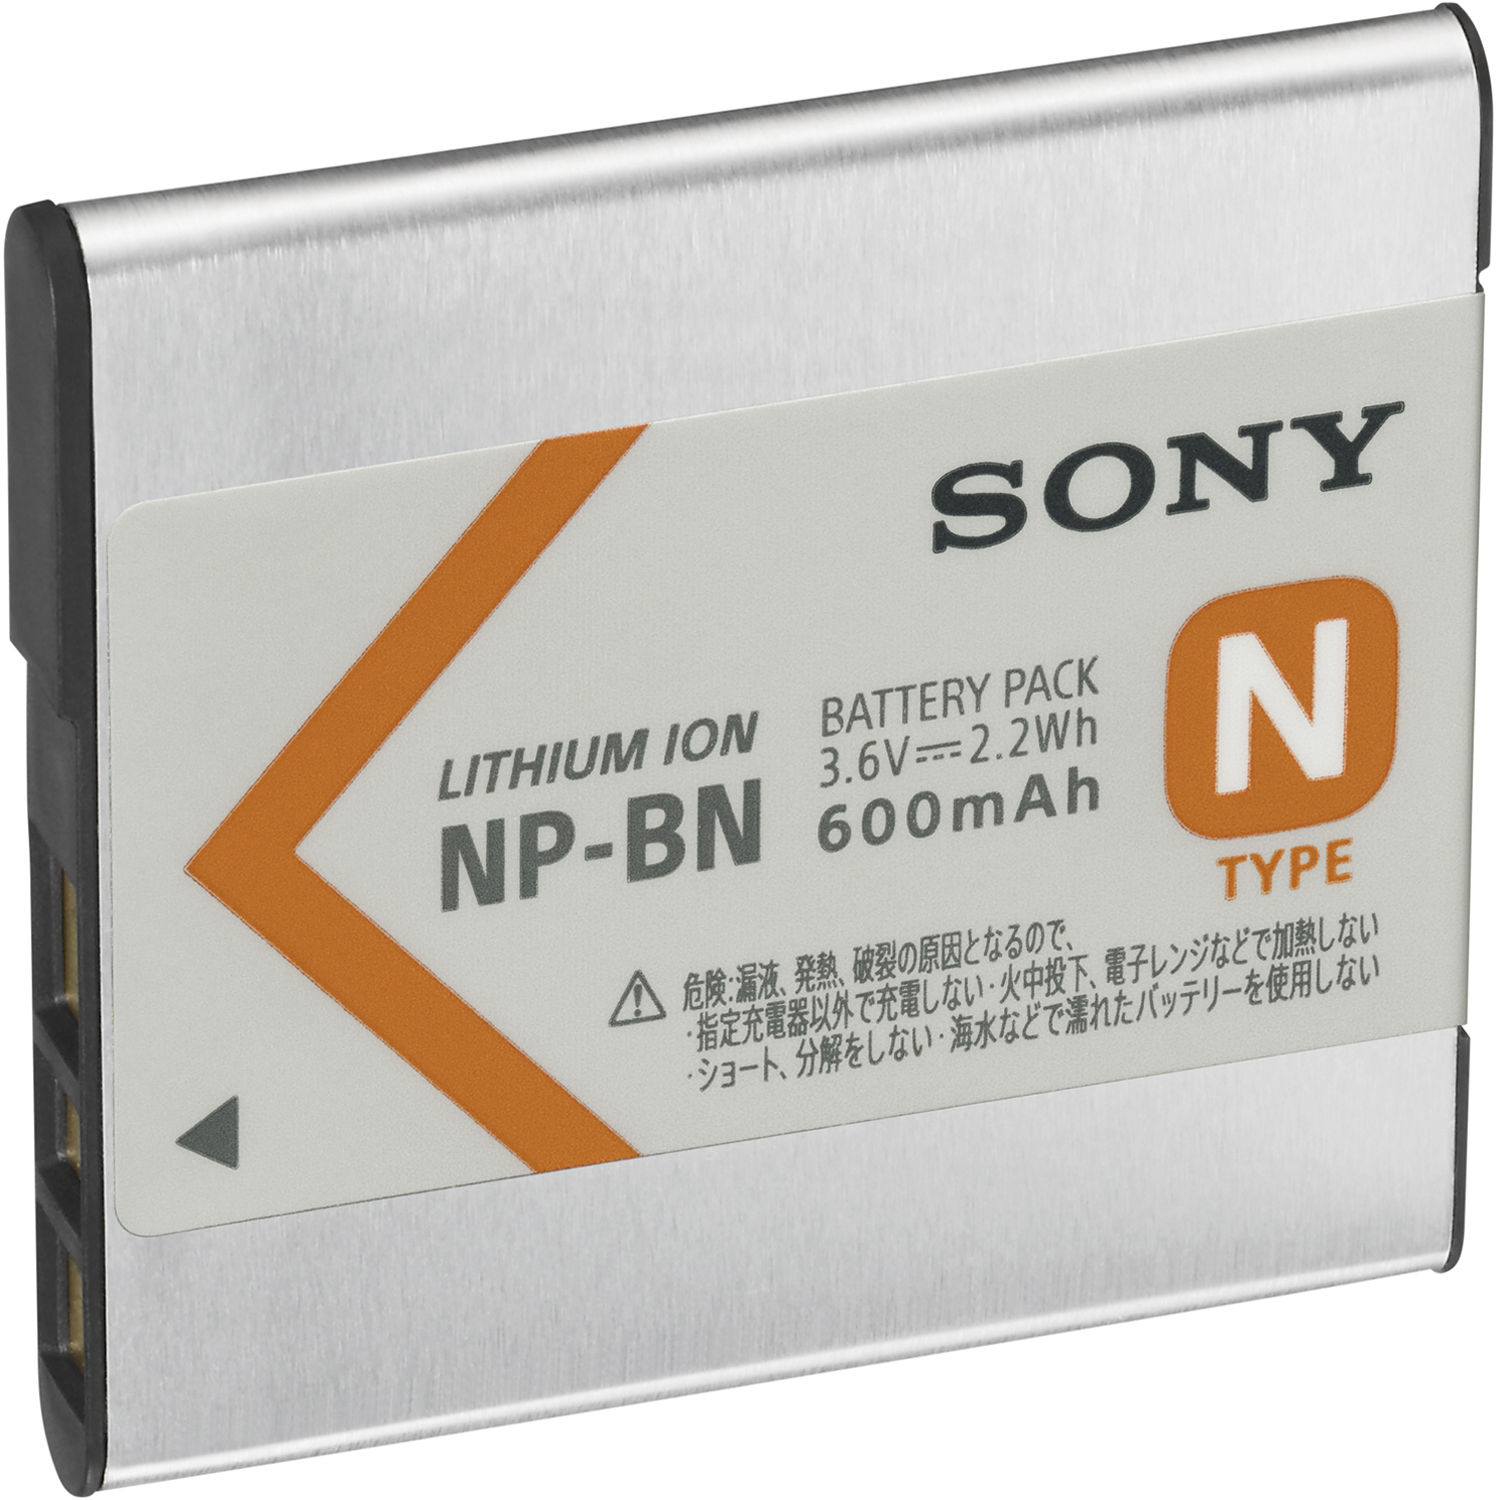 Sony NP-BN N-Series Rechargeable Battery Pack for Select Cameras (3.6V, 600mAh, 2.2Wh)